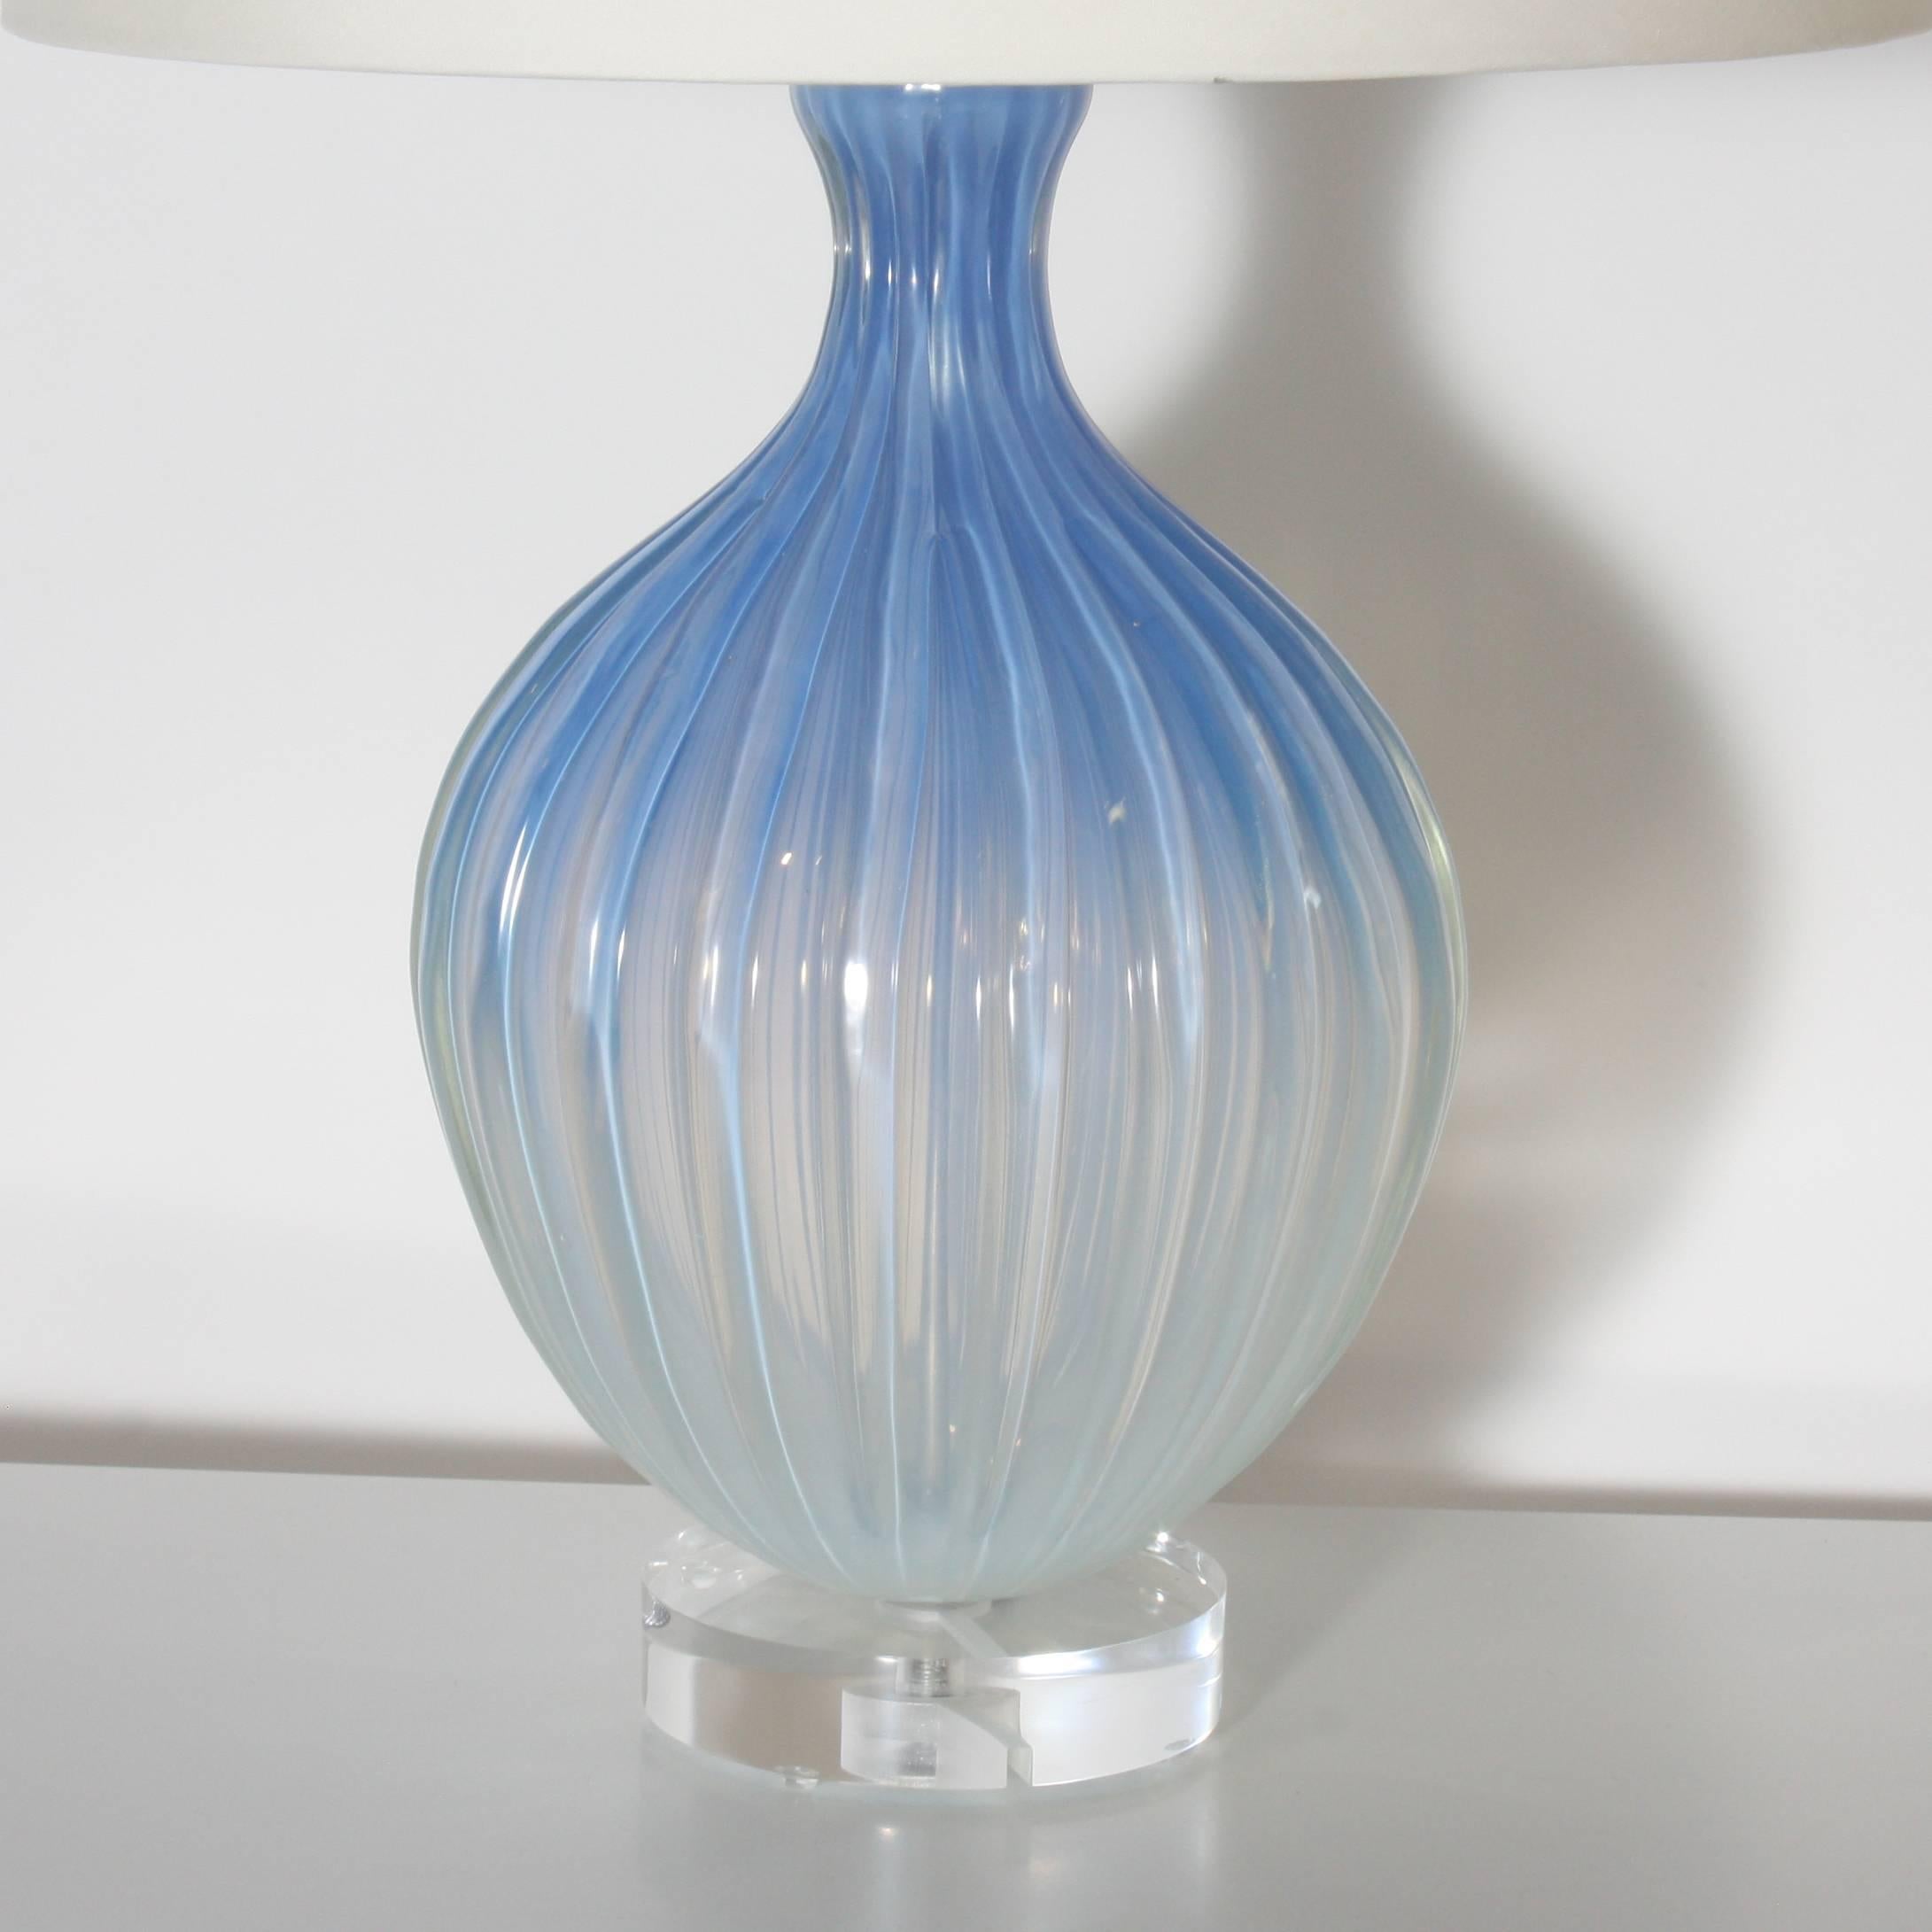 Opalescent blue Marbro Murano lamp by Seguso. Off-white pongee shade. Three-way socket, 50/100/150 watt. Nickel hardware. Lucite base. Crystal ball finial. Silver twisted cording.